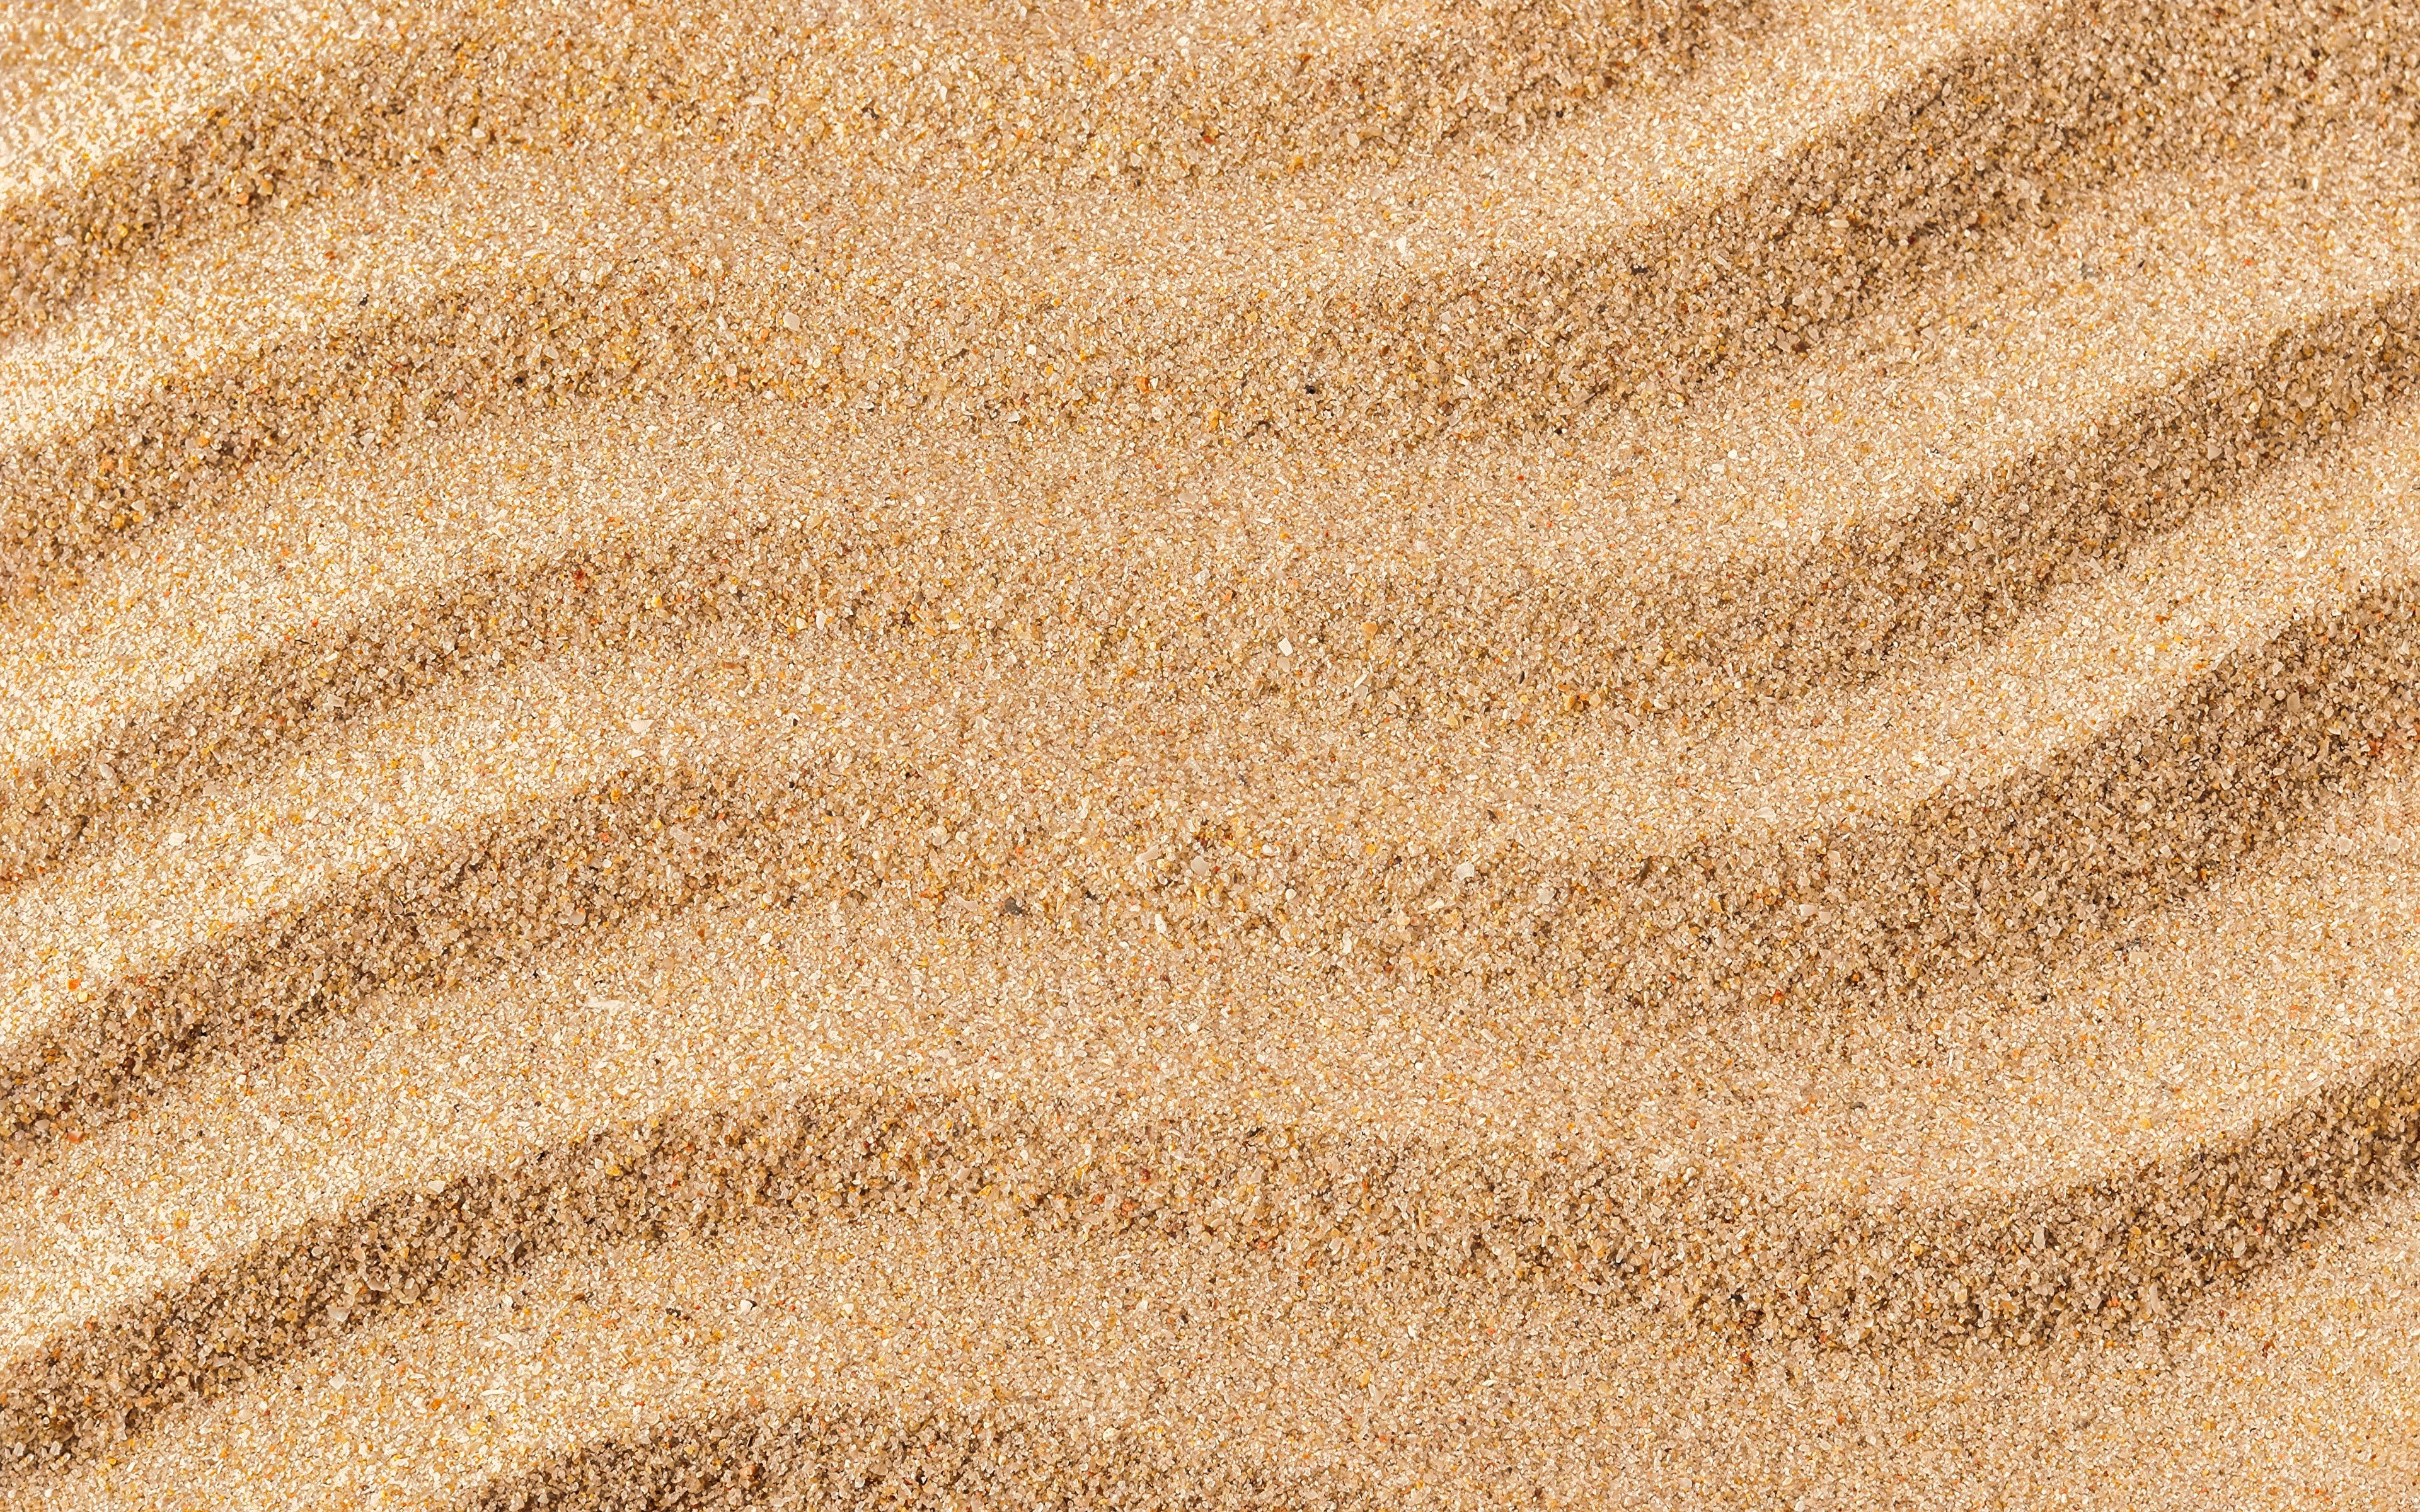 brown sand with shadow of person iPhone X Wallpapers Free Download